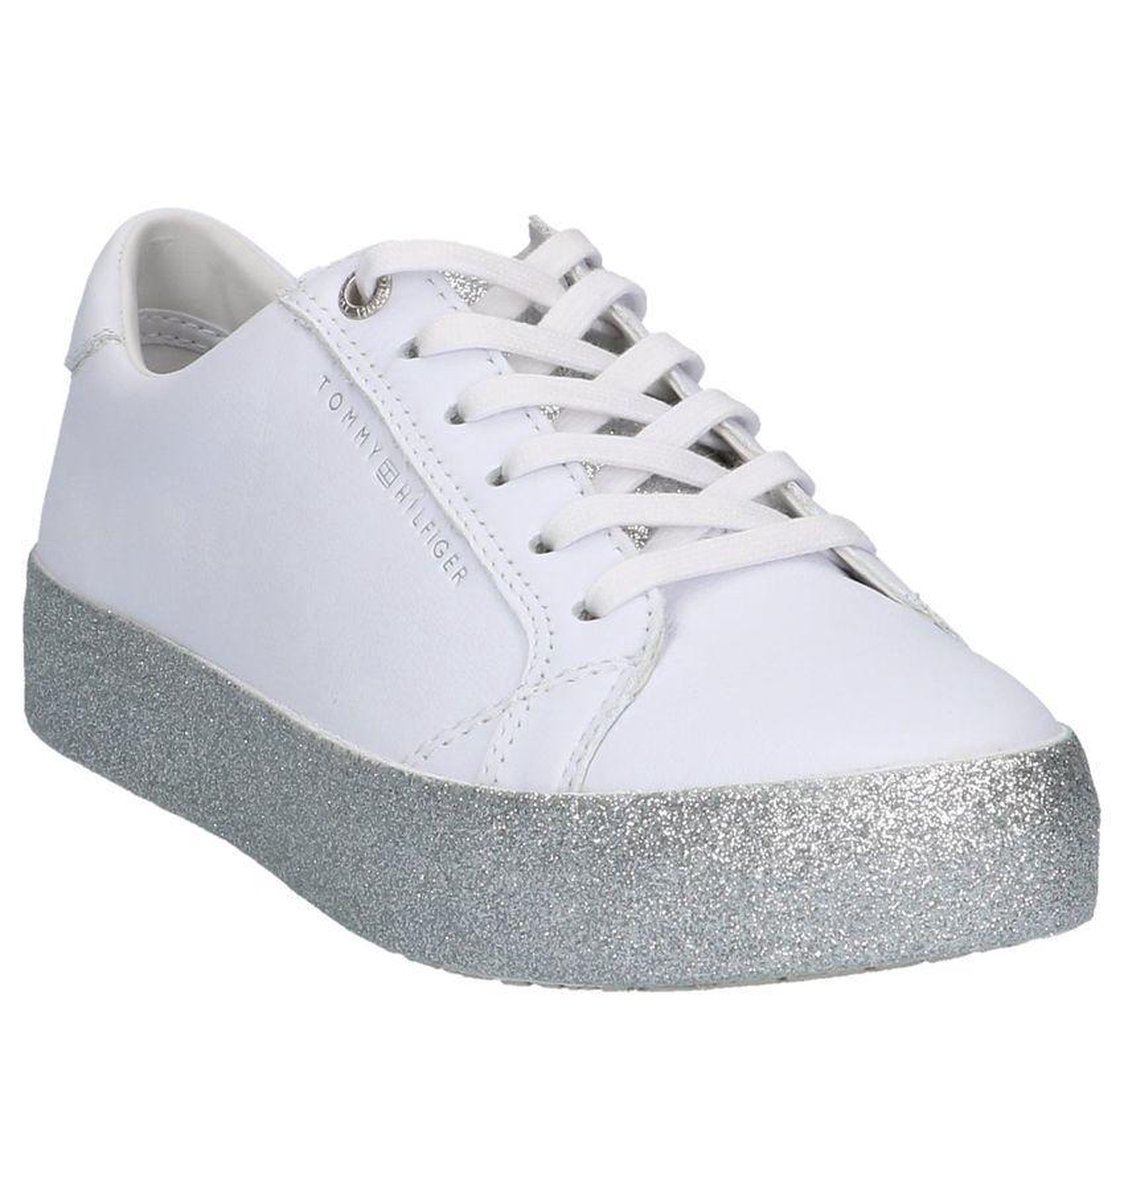 Tommy Hilfiger - Sparkle Outsole Glitter Sneaker - Lage sneakers - Dames -  Maat 36 -... | bol.com